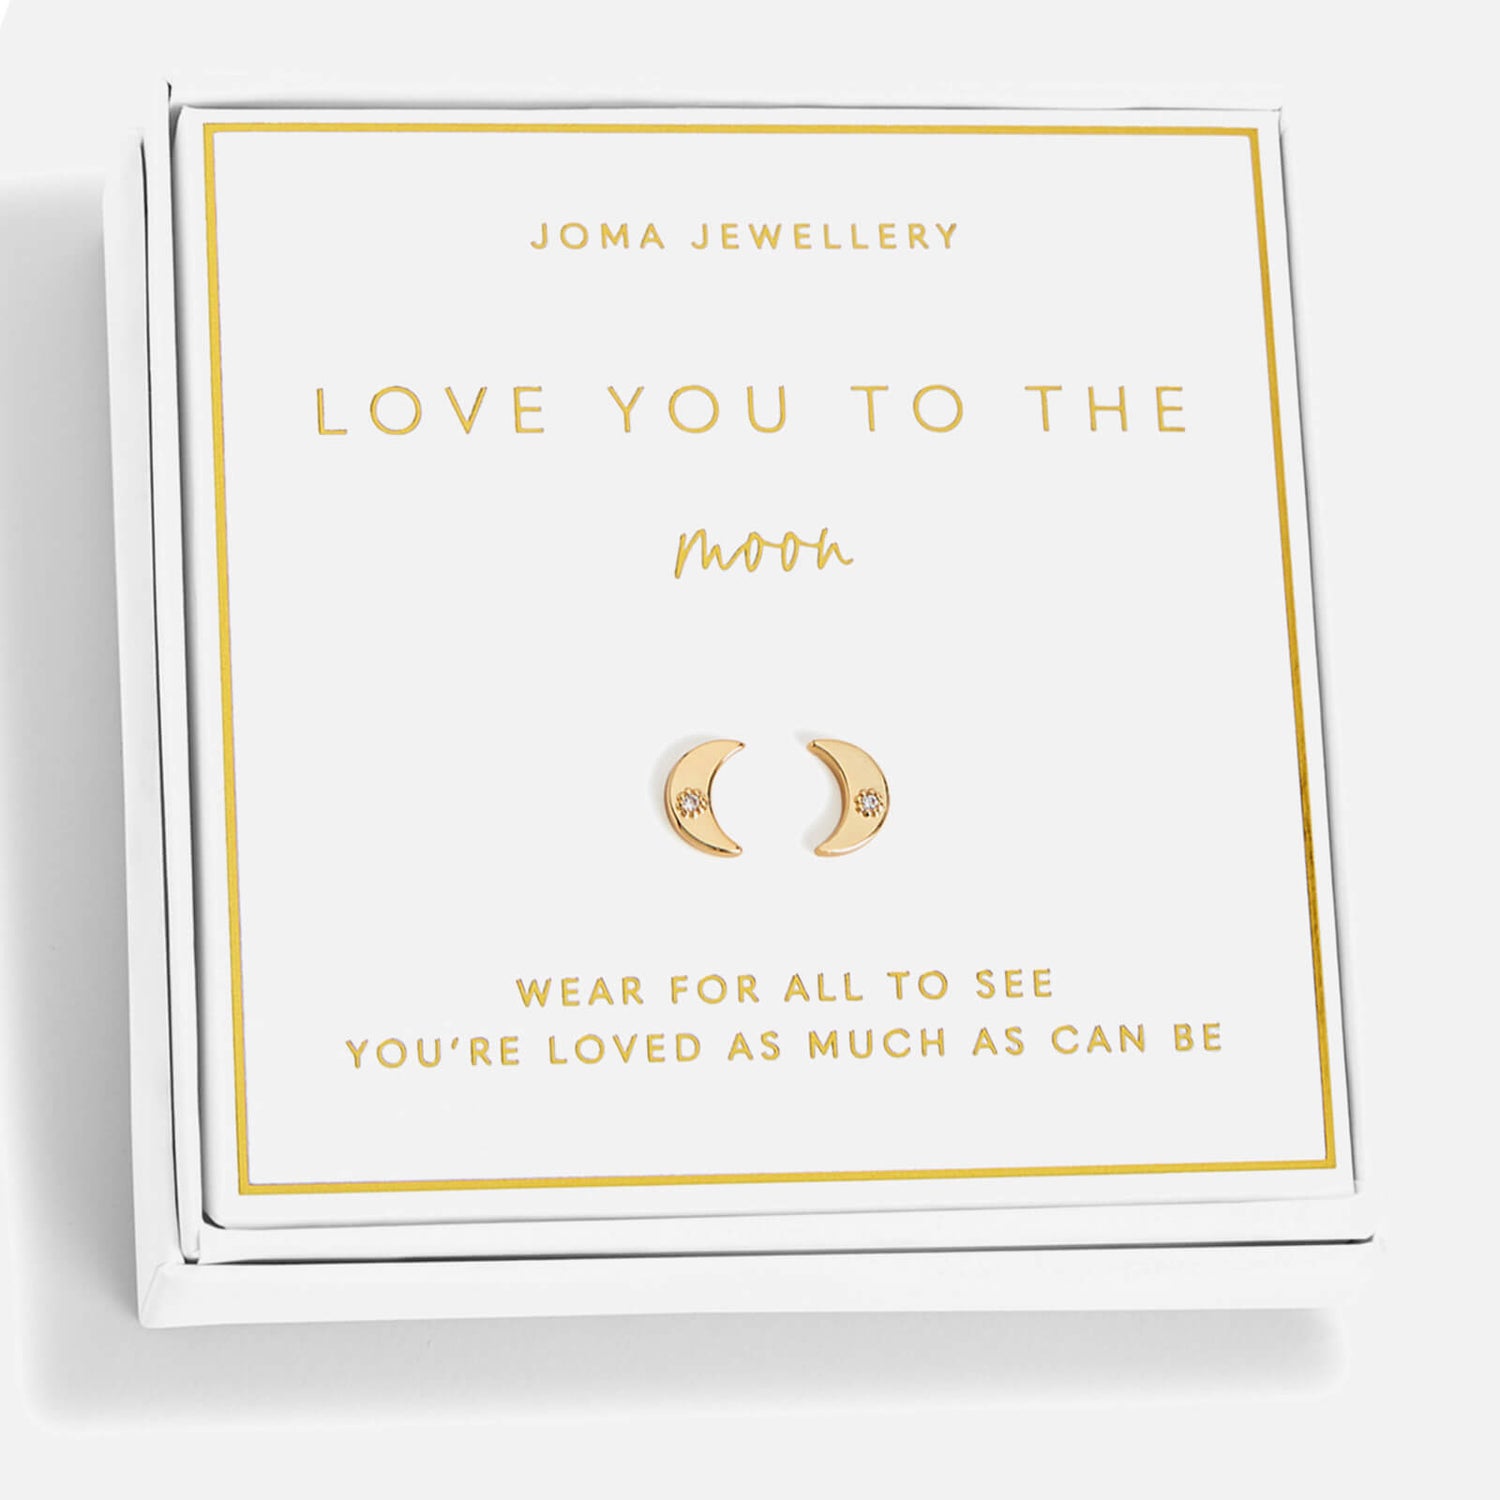 Joma Jewellery Beautifully Boxed Love You To The Moon Earrings